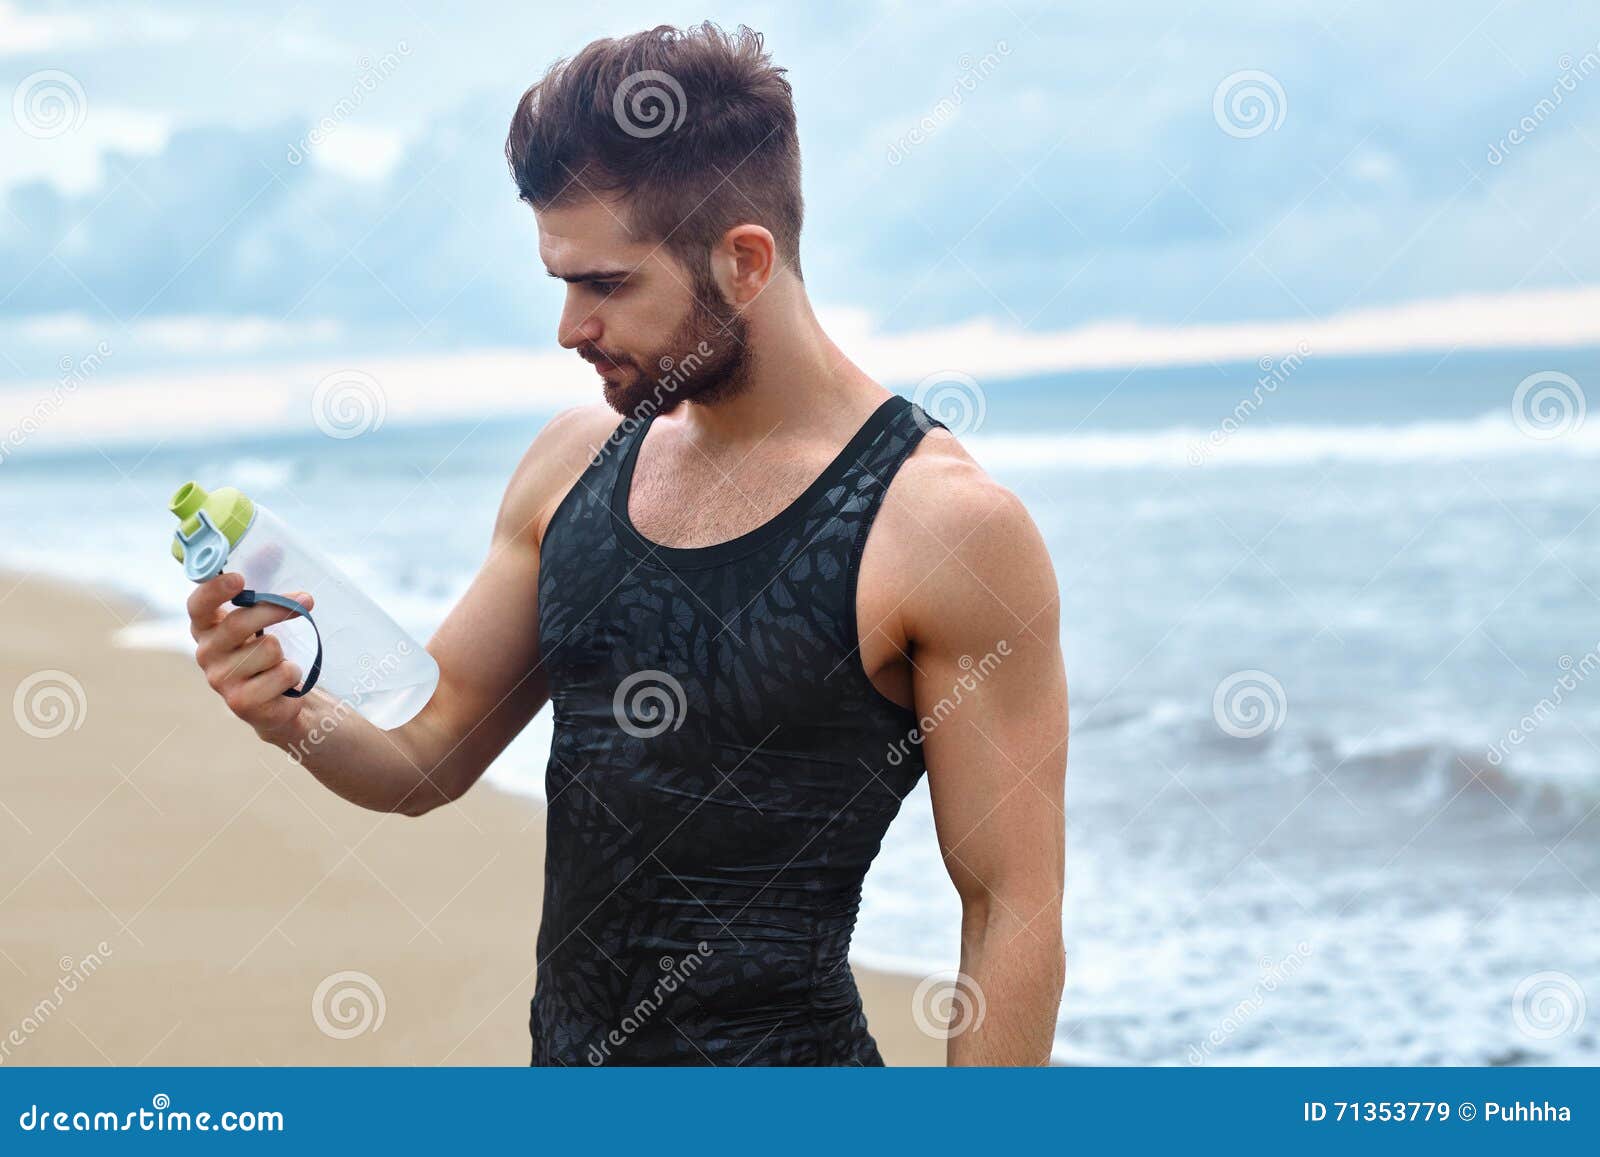 https://thumbs.dreamstime.com/z/fitness-man-water-bottle-resting-workout-beach-portrait-healthy-athletic-fit-body-holding-refreshing-71353779.jpg